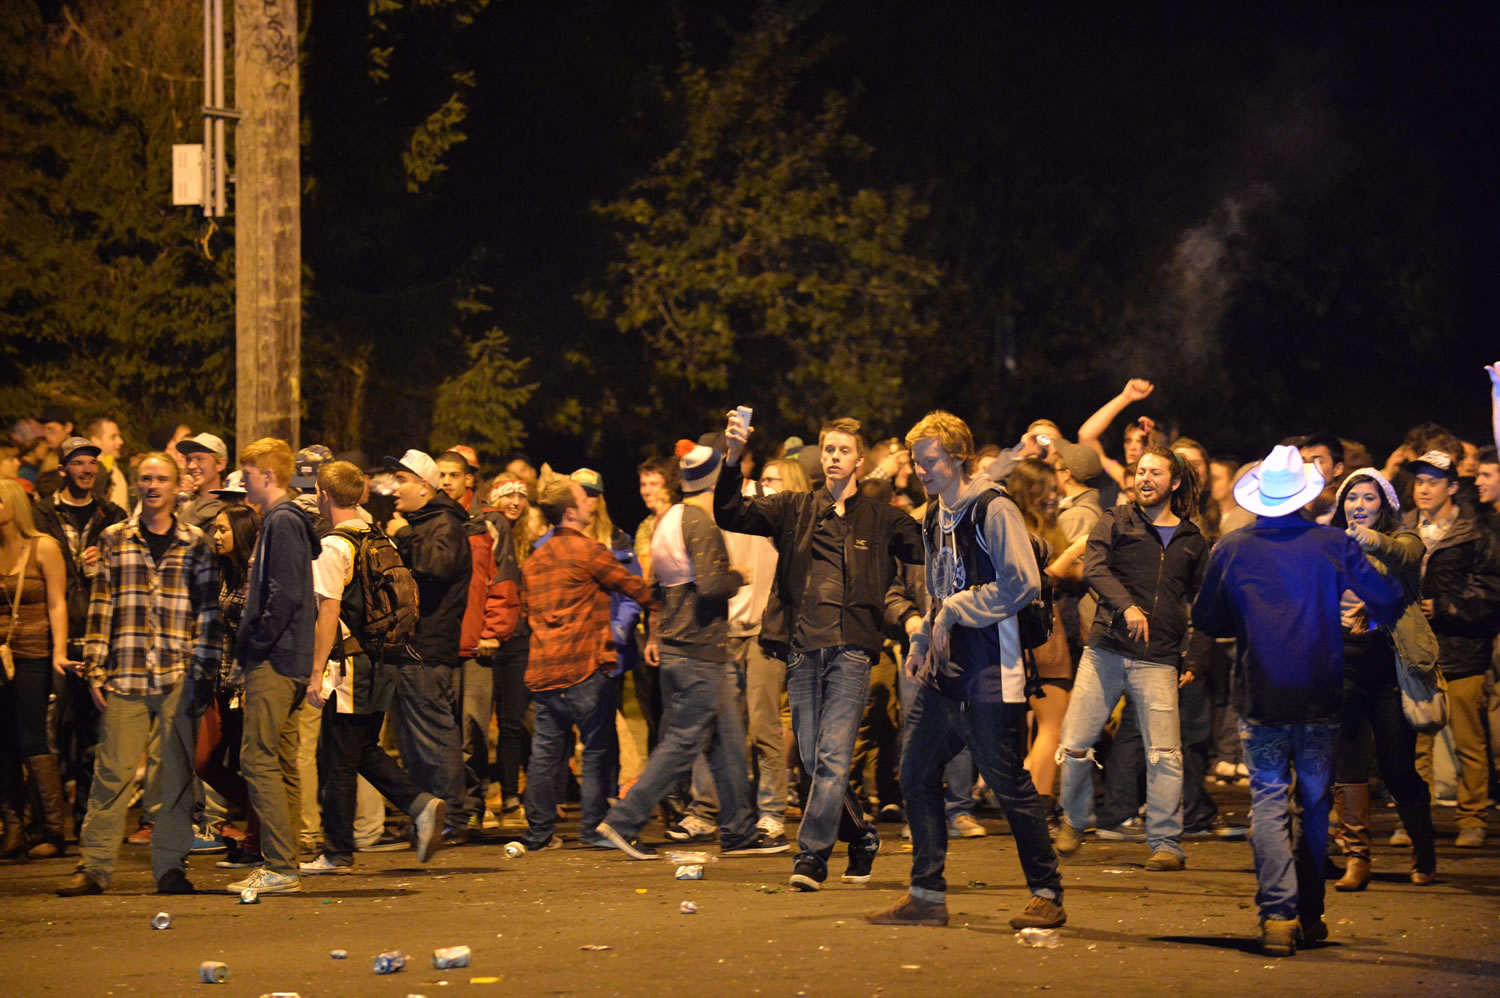 Hundreds of revelers gather in Bellingham near the Western Washington University campus after police dispersed a noisy party that had drawn a few hundred people.